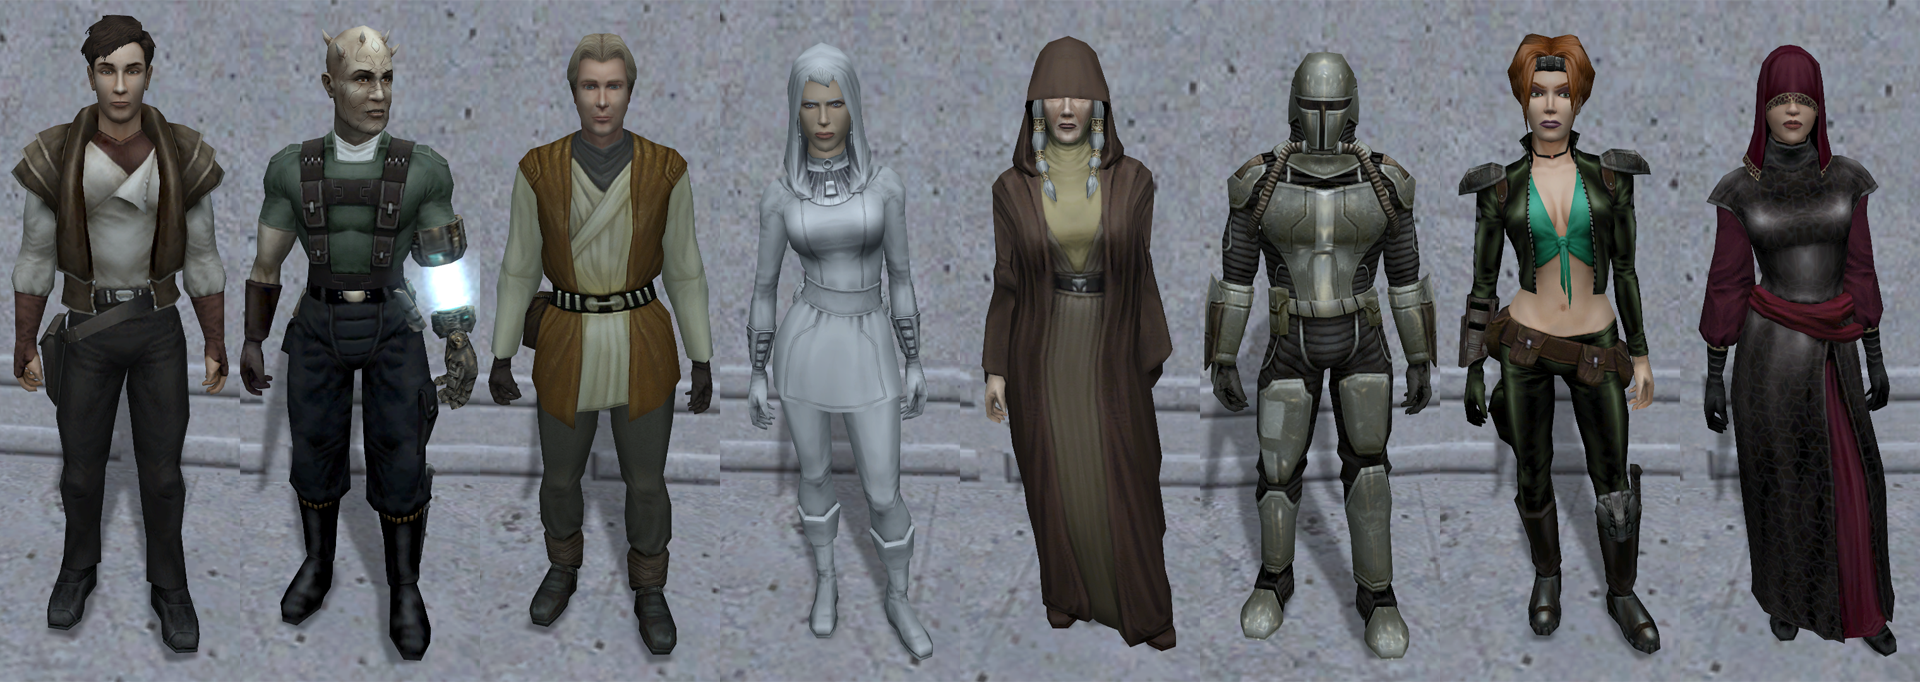 Knights of the Old Republic II: The Sith Lords.